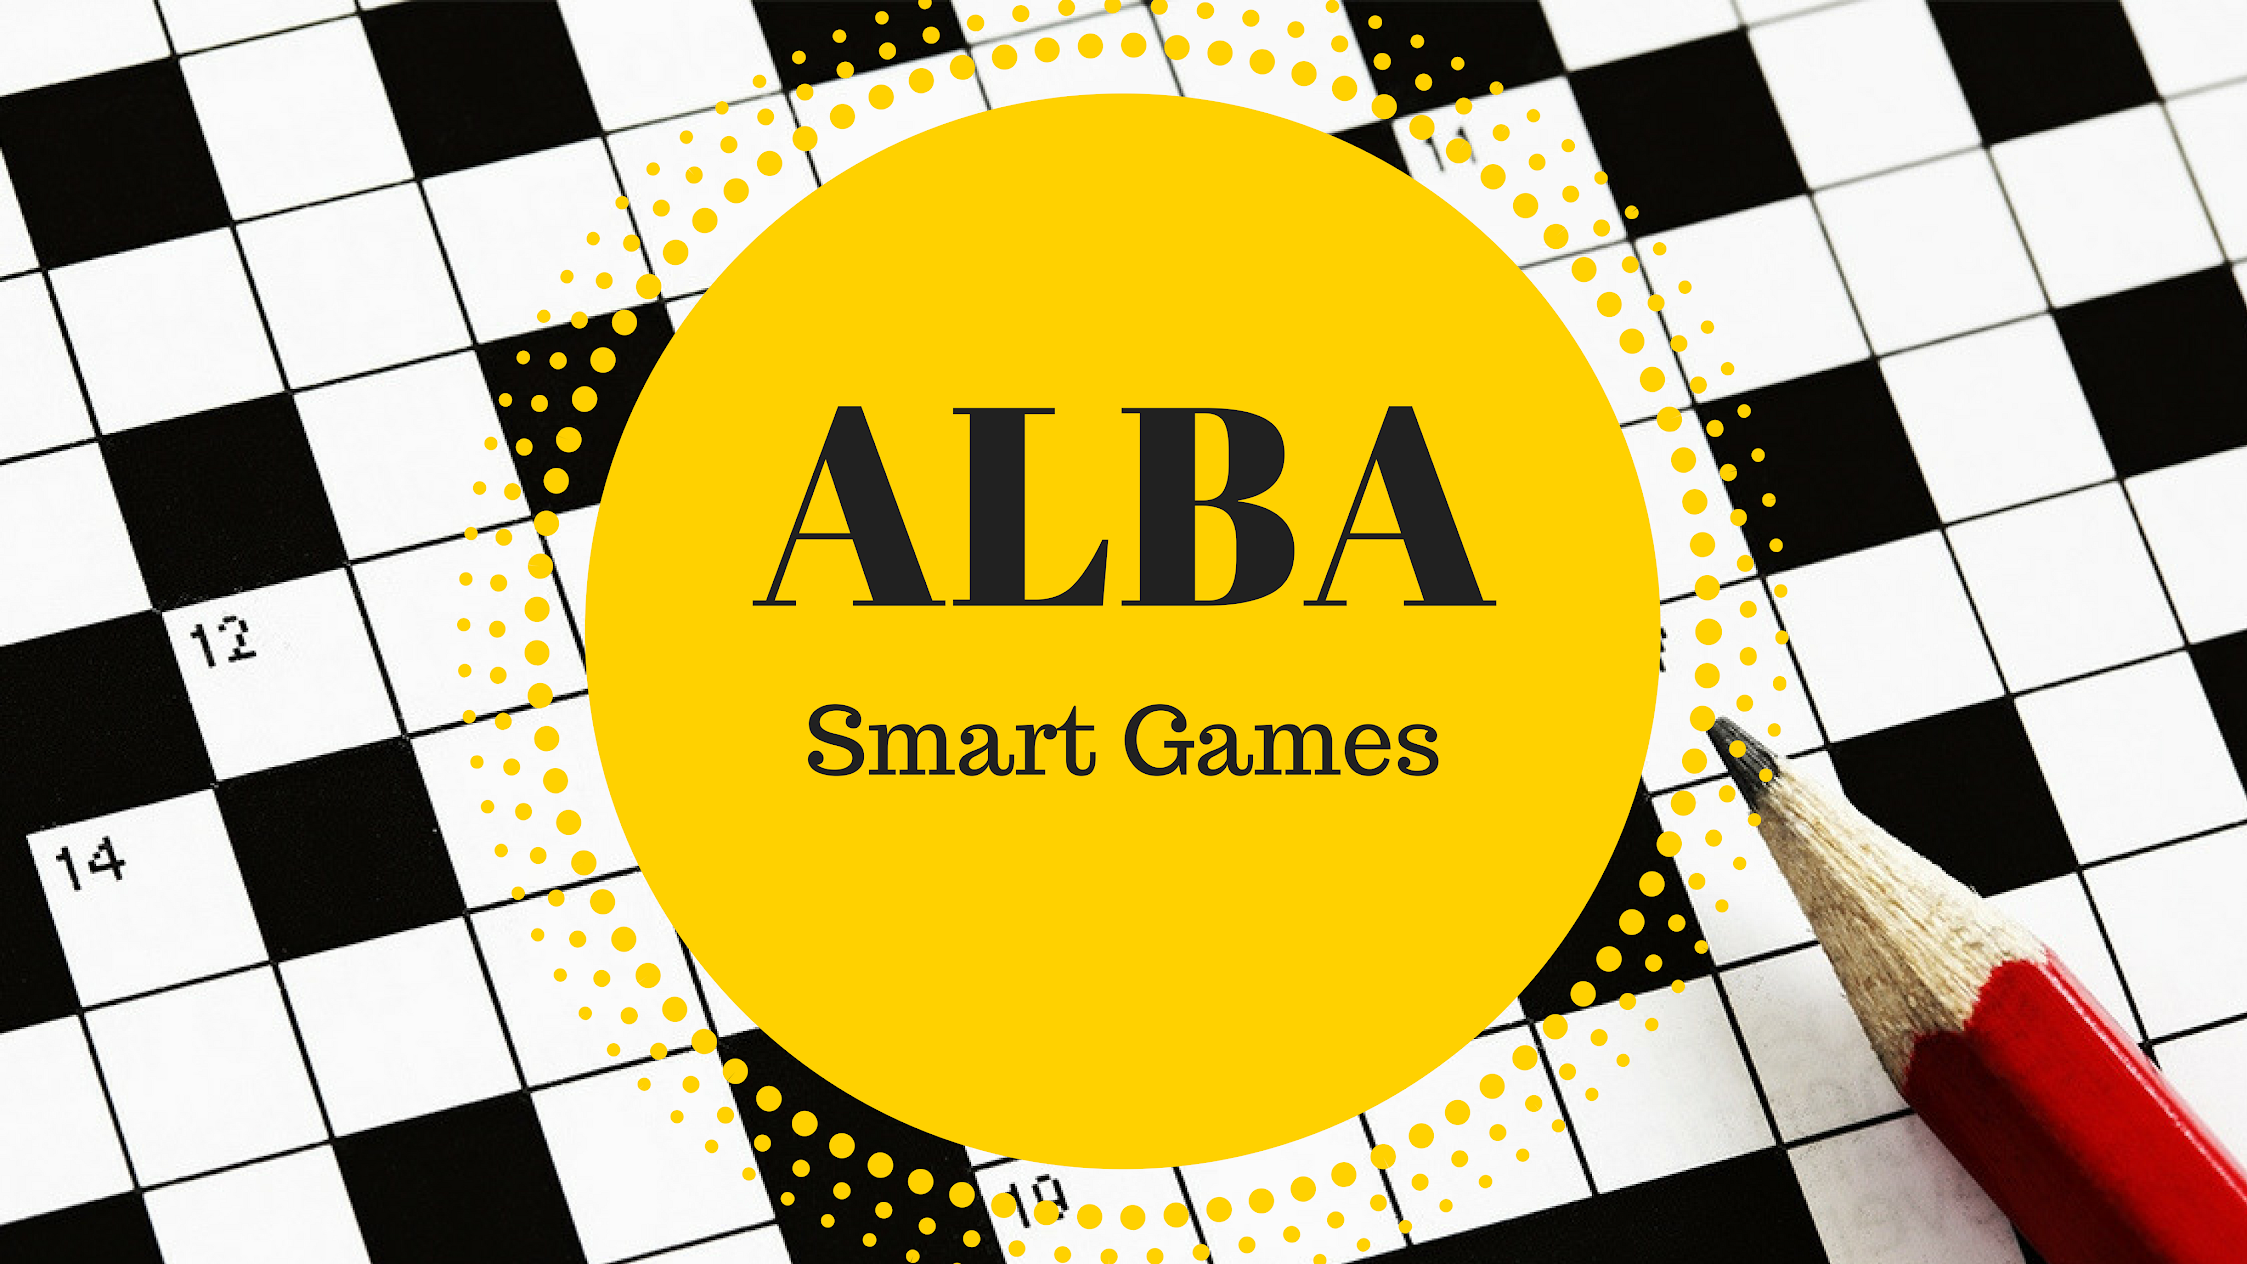 Alba Games, Puzzle games and crosswords